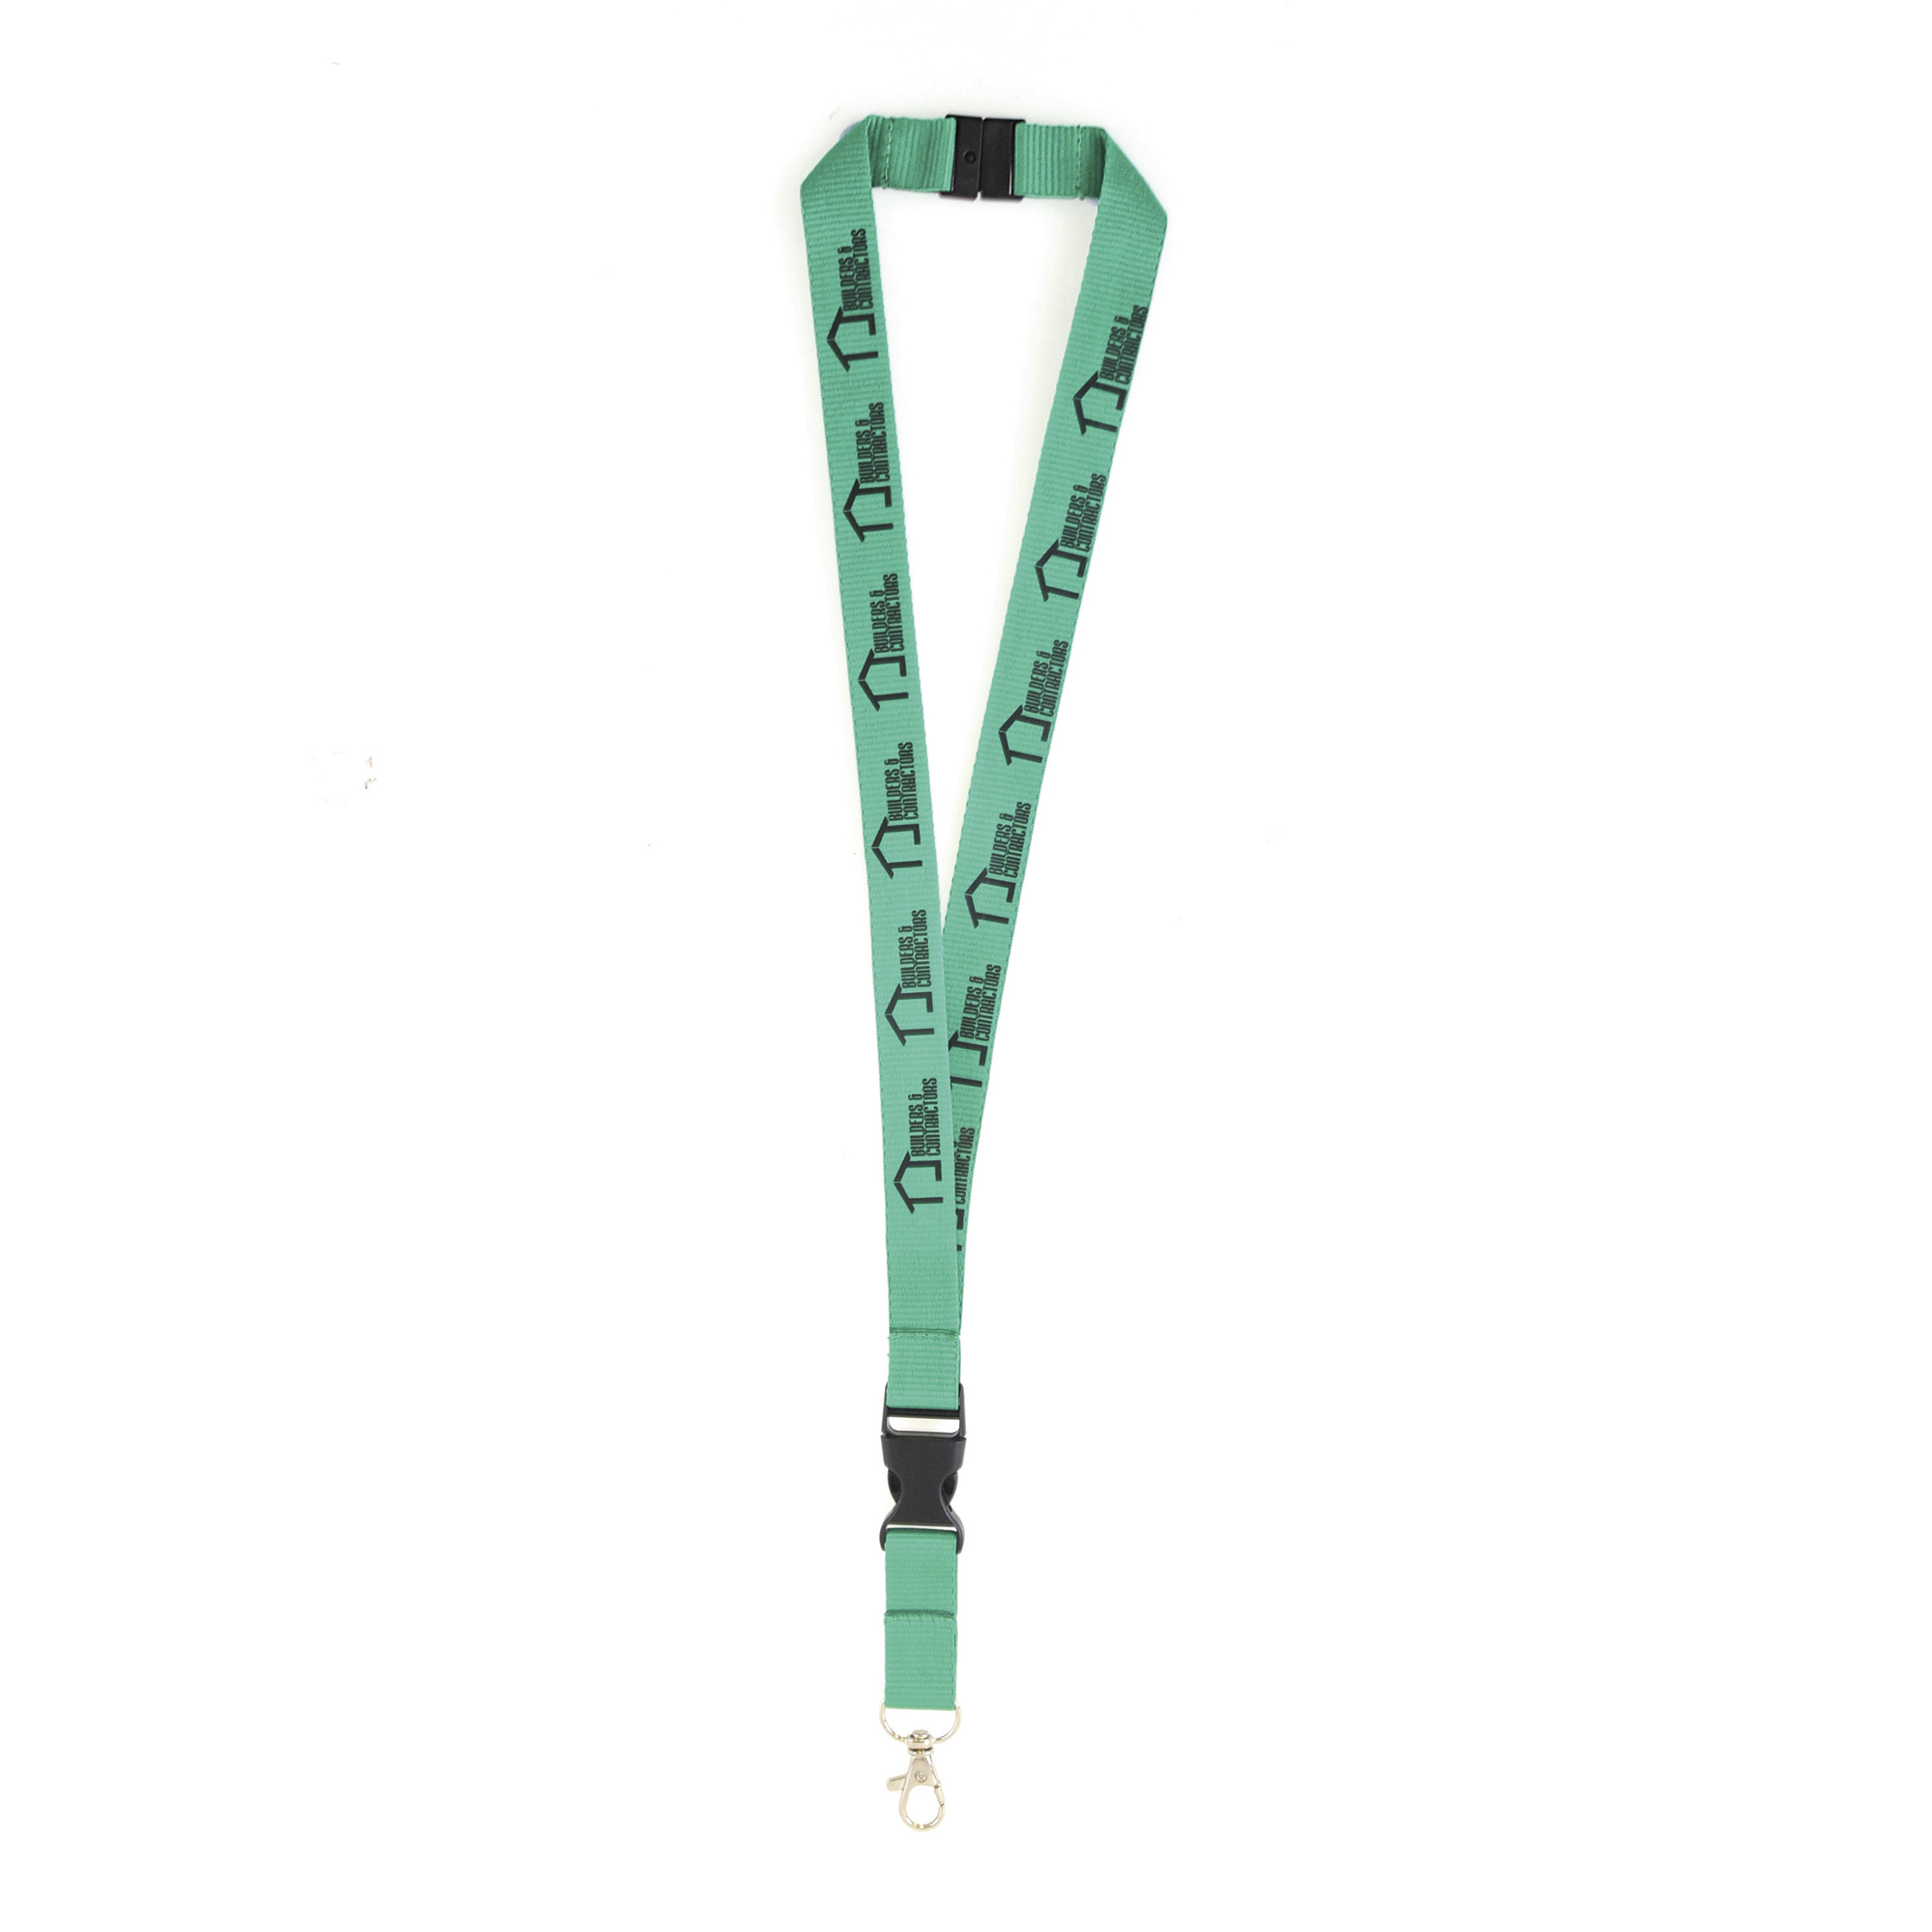 Safety Deluxe Lanyard 10mm